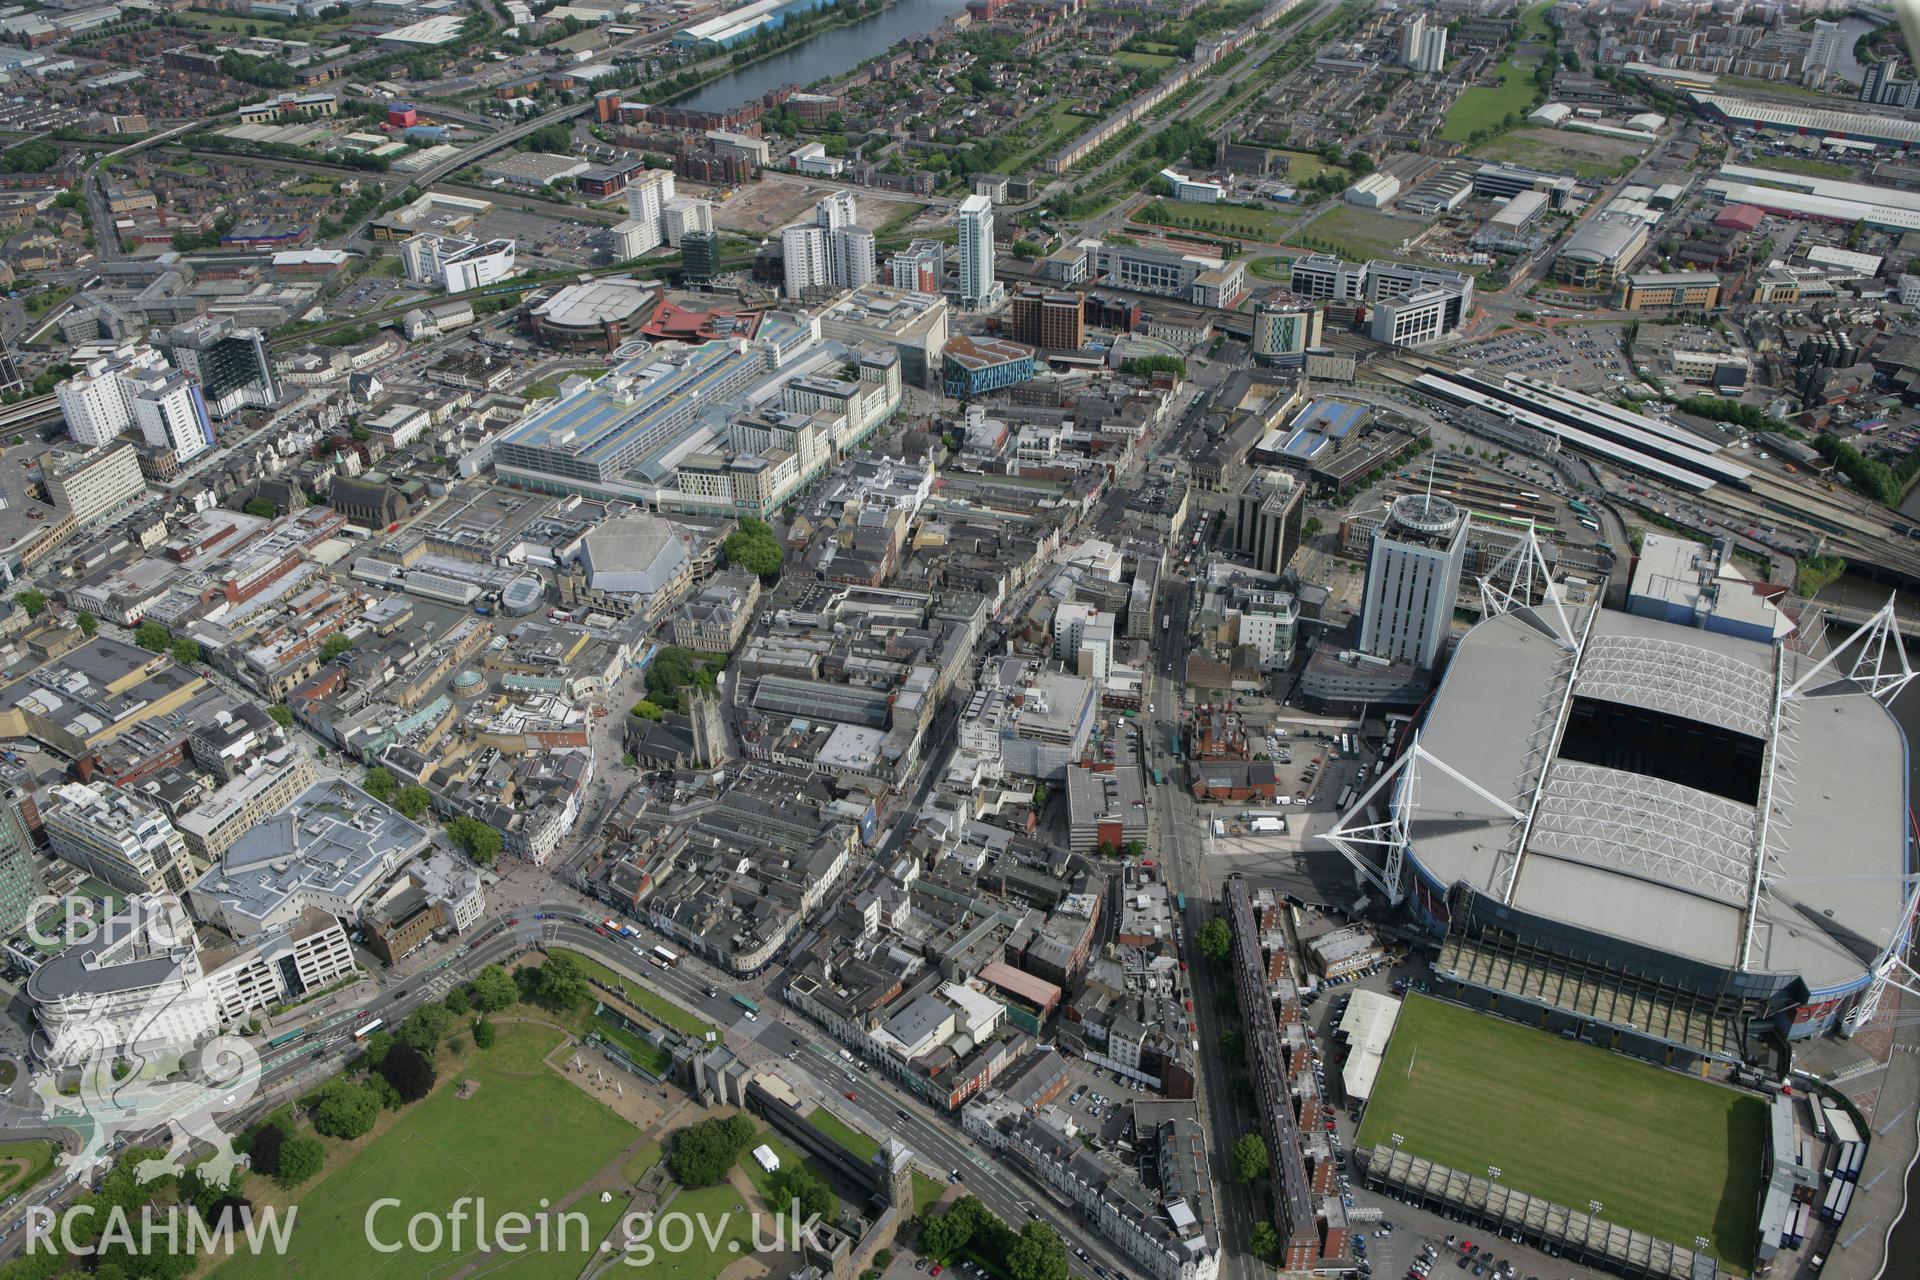 RCAHMW colour oblique photograph of Cardiff city centre. Taken by Toby Driver on 13/06/2011.